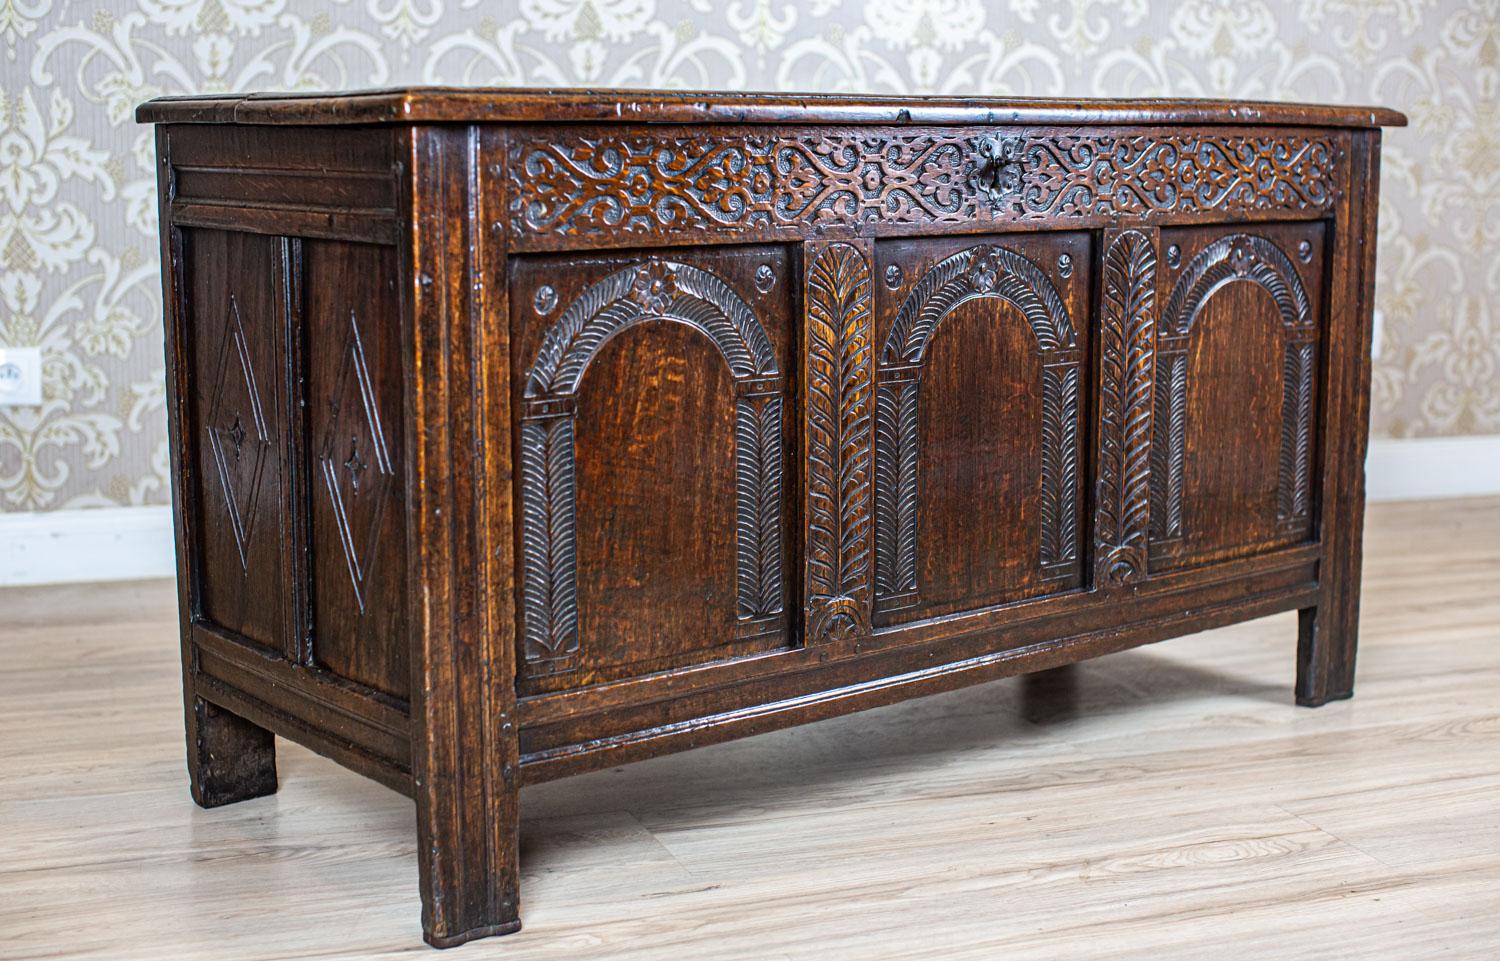 19th-Century Oak Cassone in Carved Floral Patterns For Sale 5